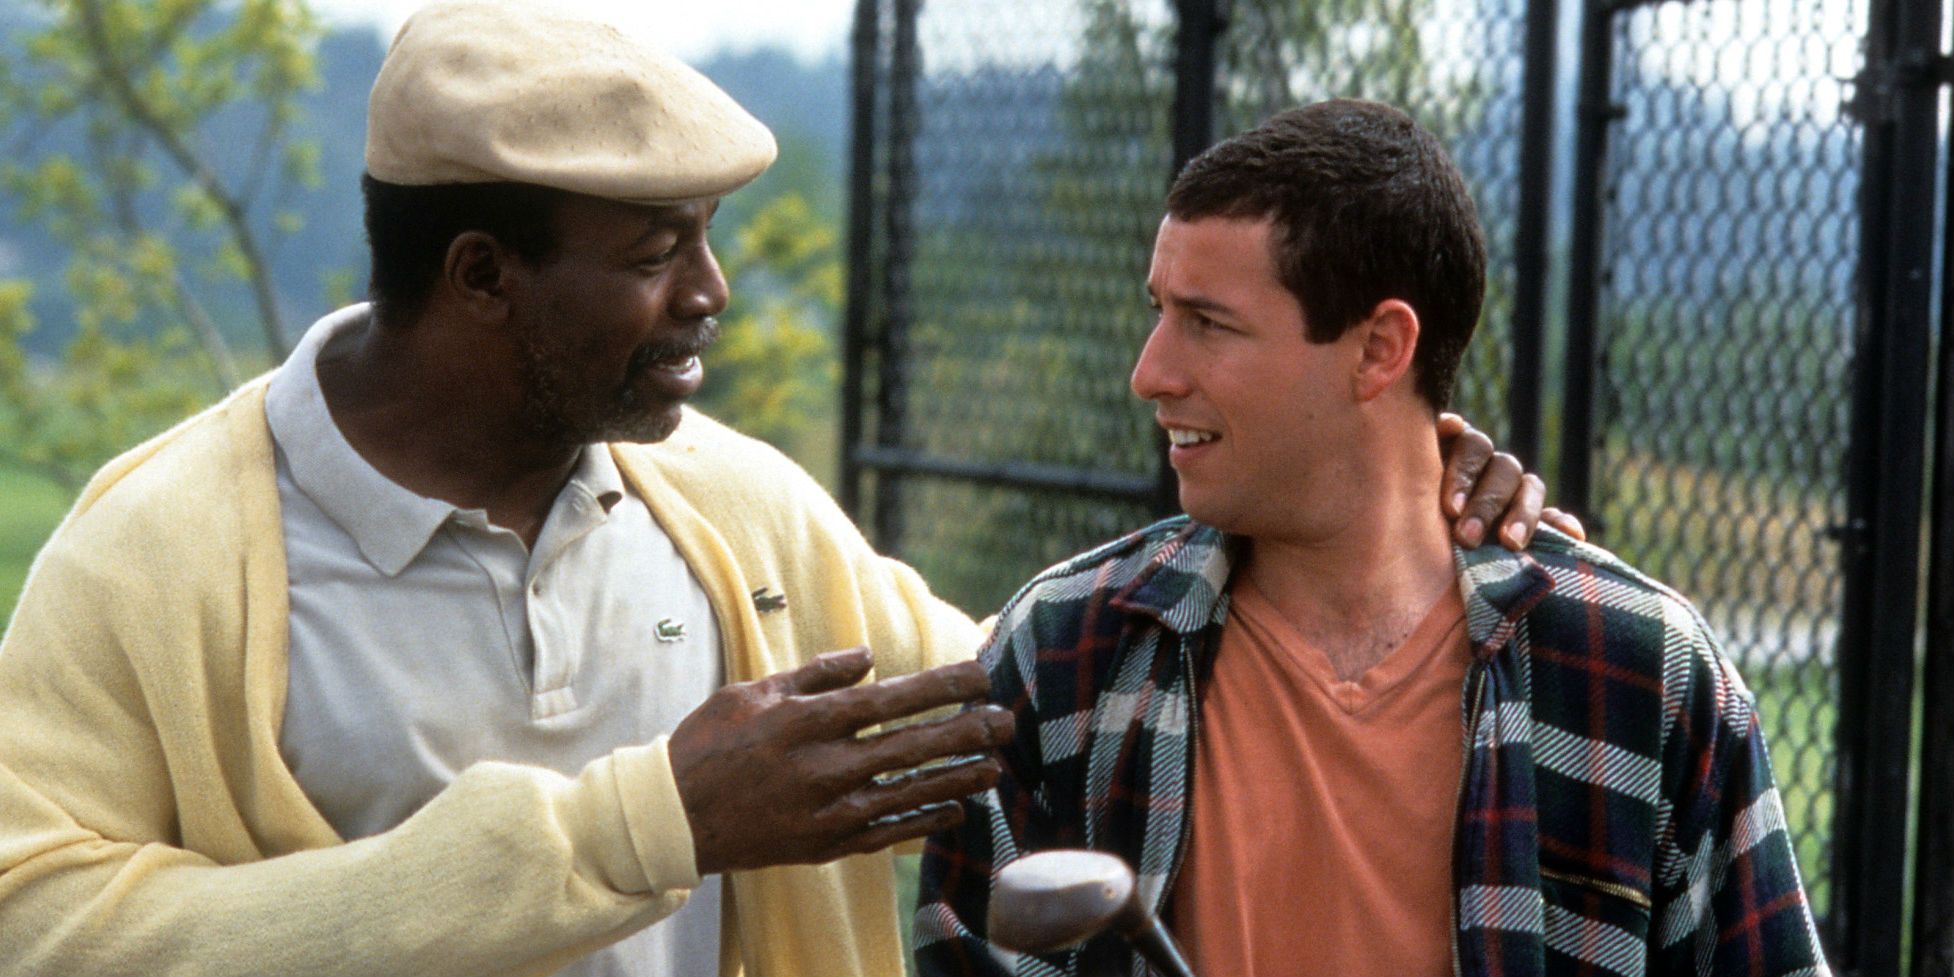 Carl Weathers as Chubs pointing his wooden hand at Adam Sandler in Happy Gilmore